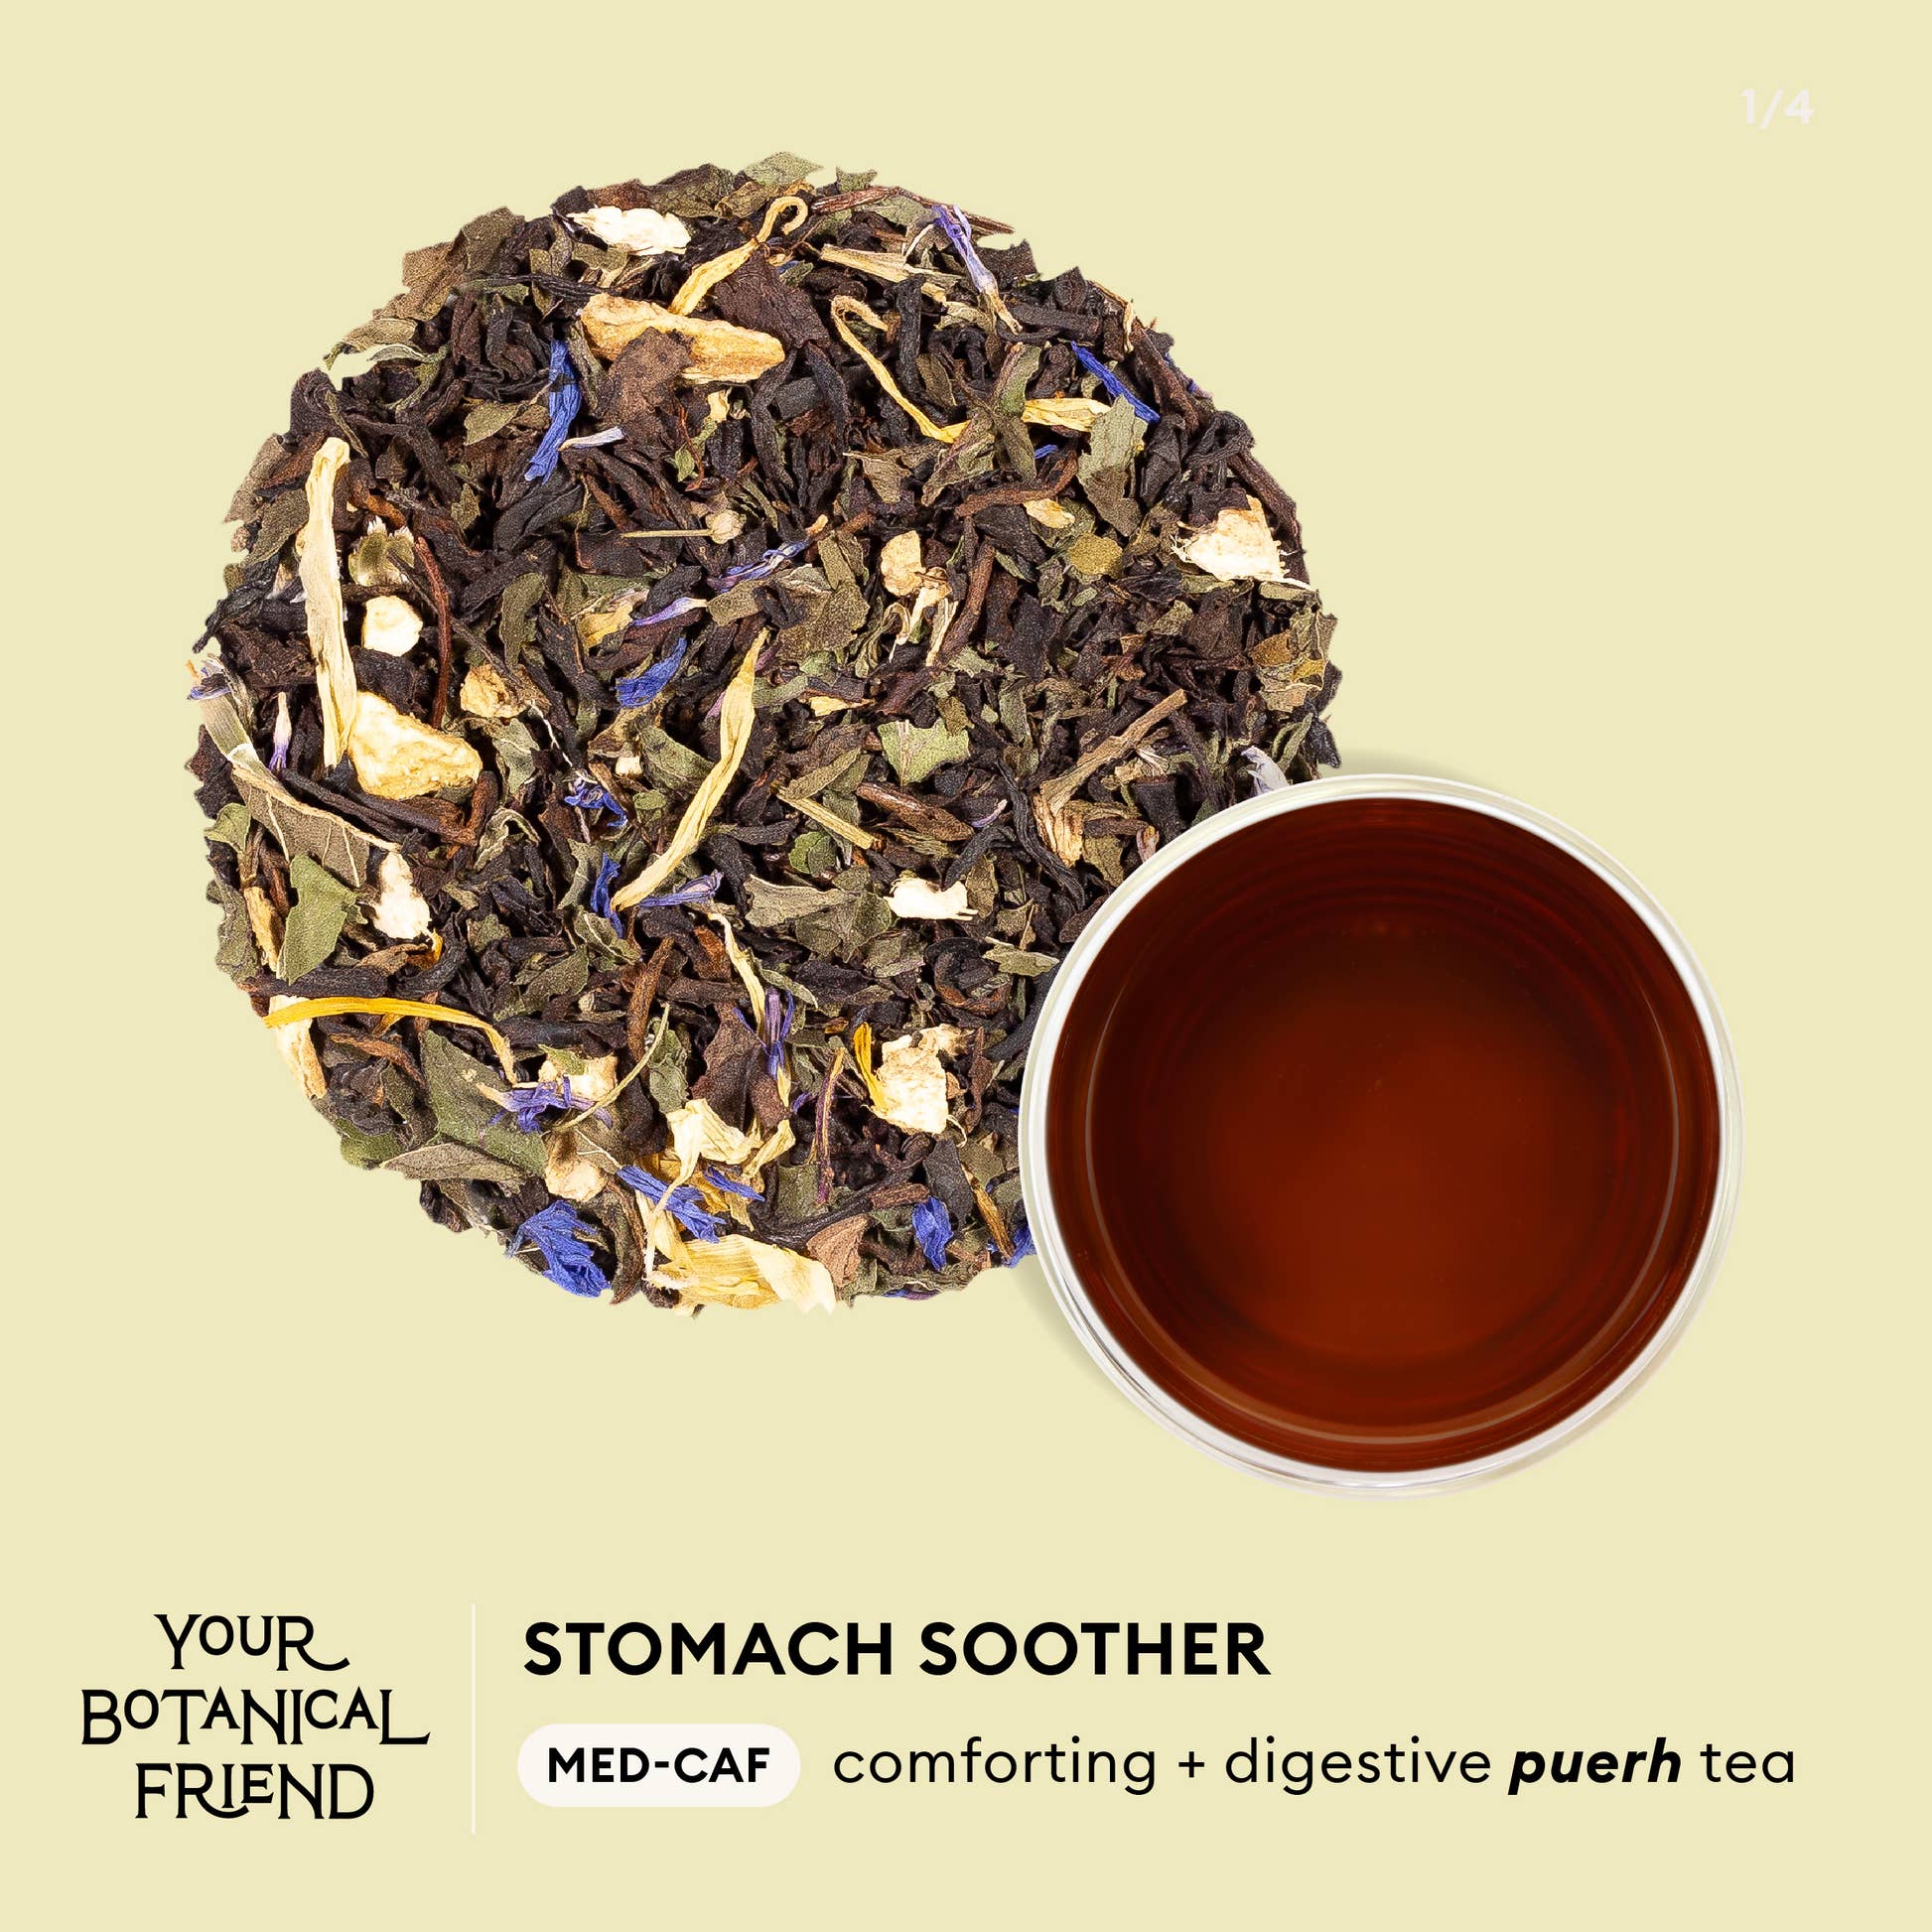 Your Botanical Friend - Stomach Soother caf-free, comforting + digestif infographic